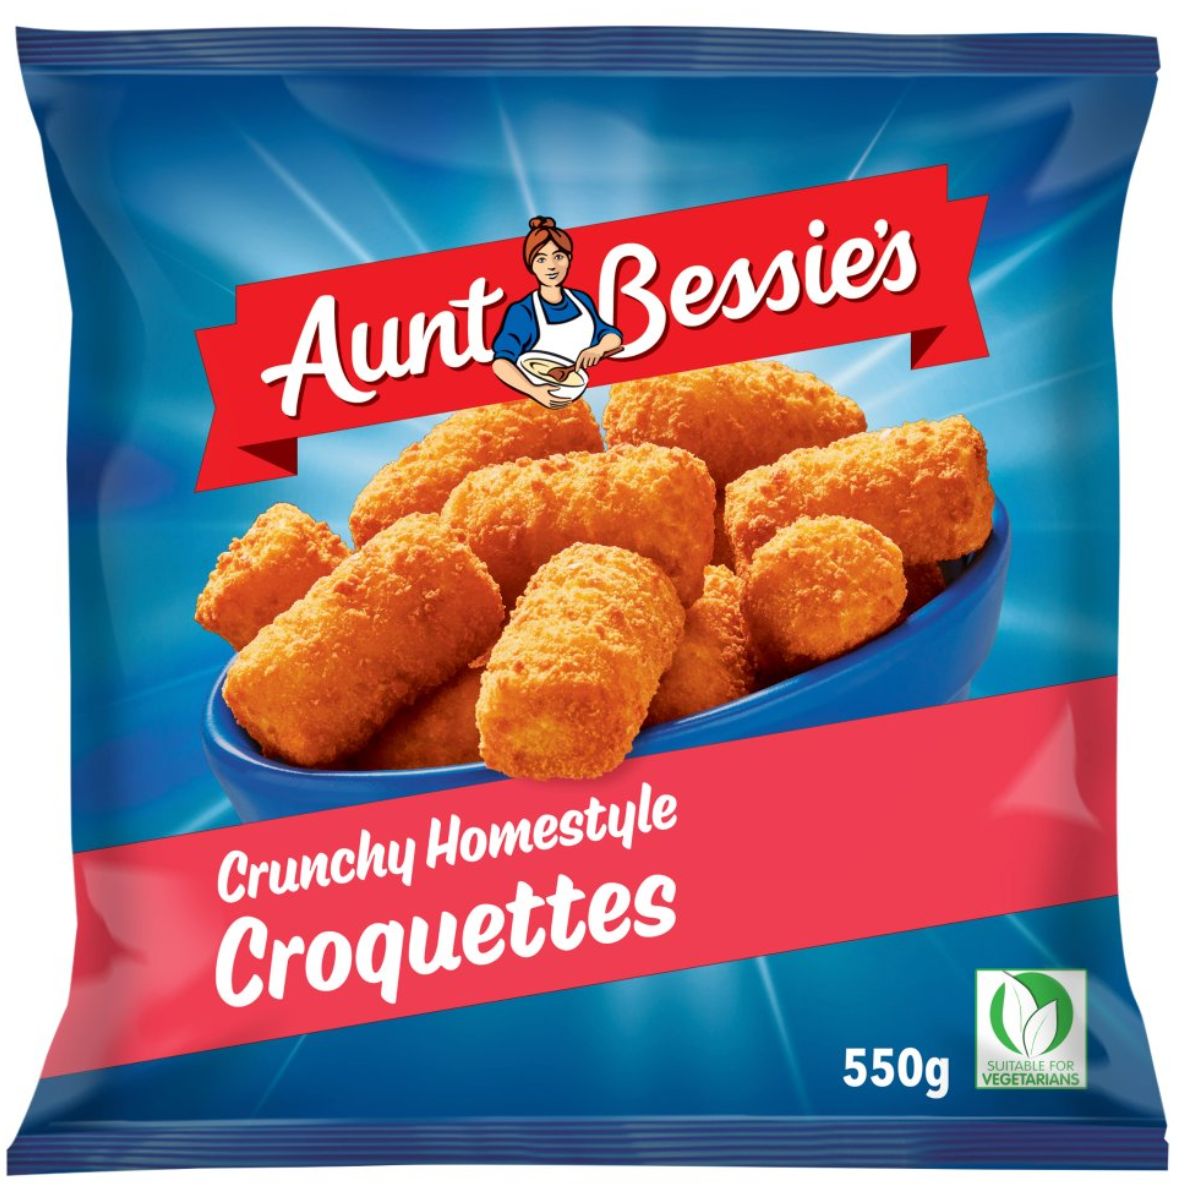 Aunt Bessies - Crunchy Homestyle Croquettes - 550g